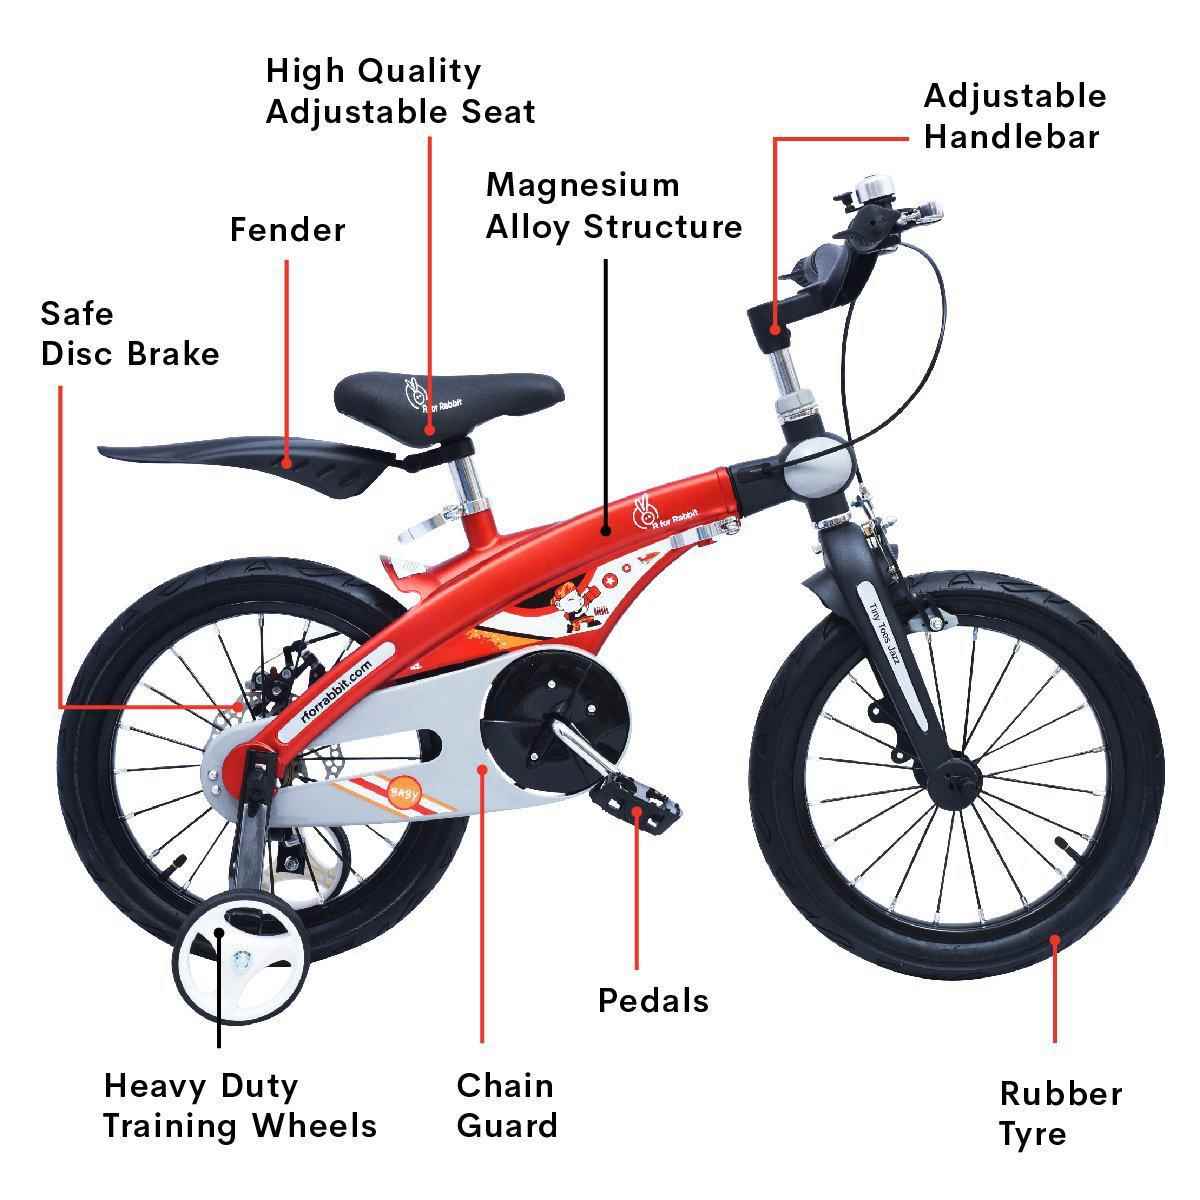 R FOR RABBIT Tiny Toes Jazz Bicycle- Smart Plug and Play Cycle for Kids for 4 Years to 7 Years(16 inch/T)